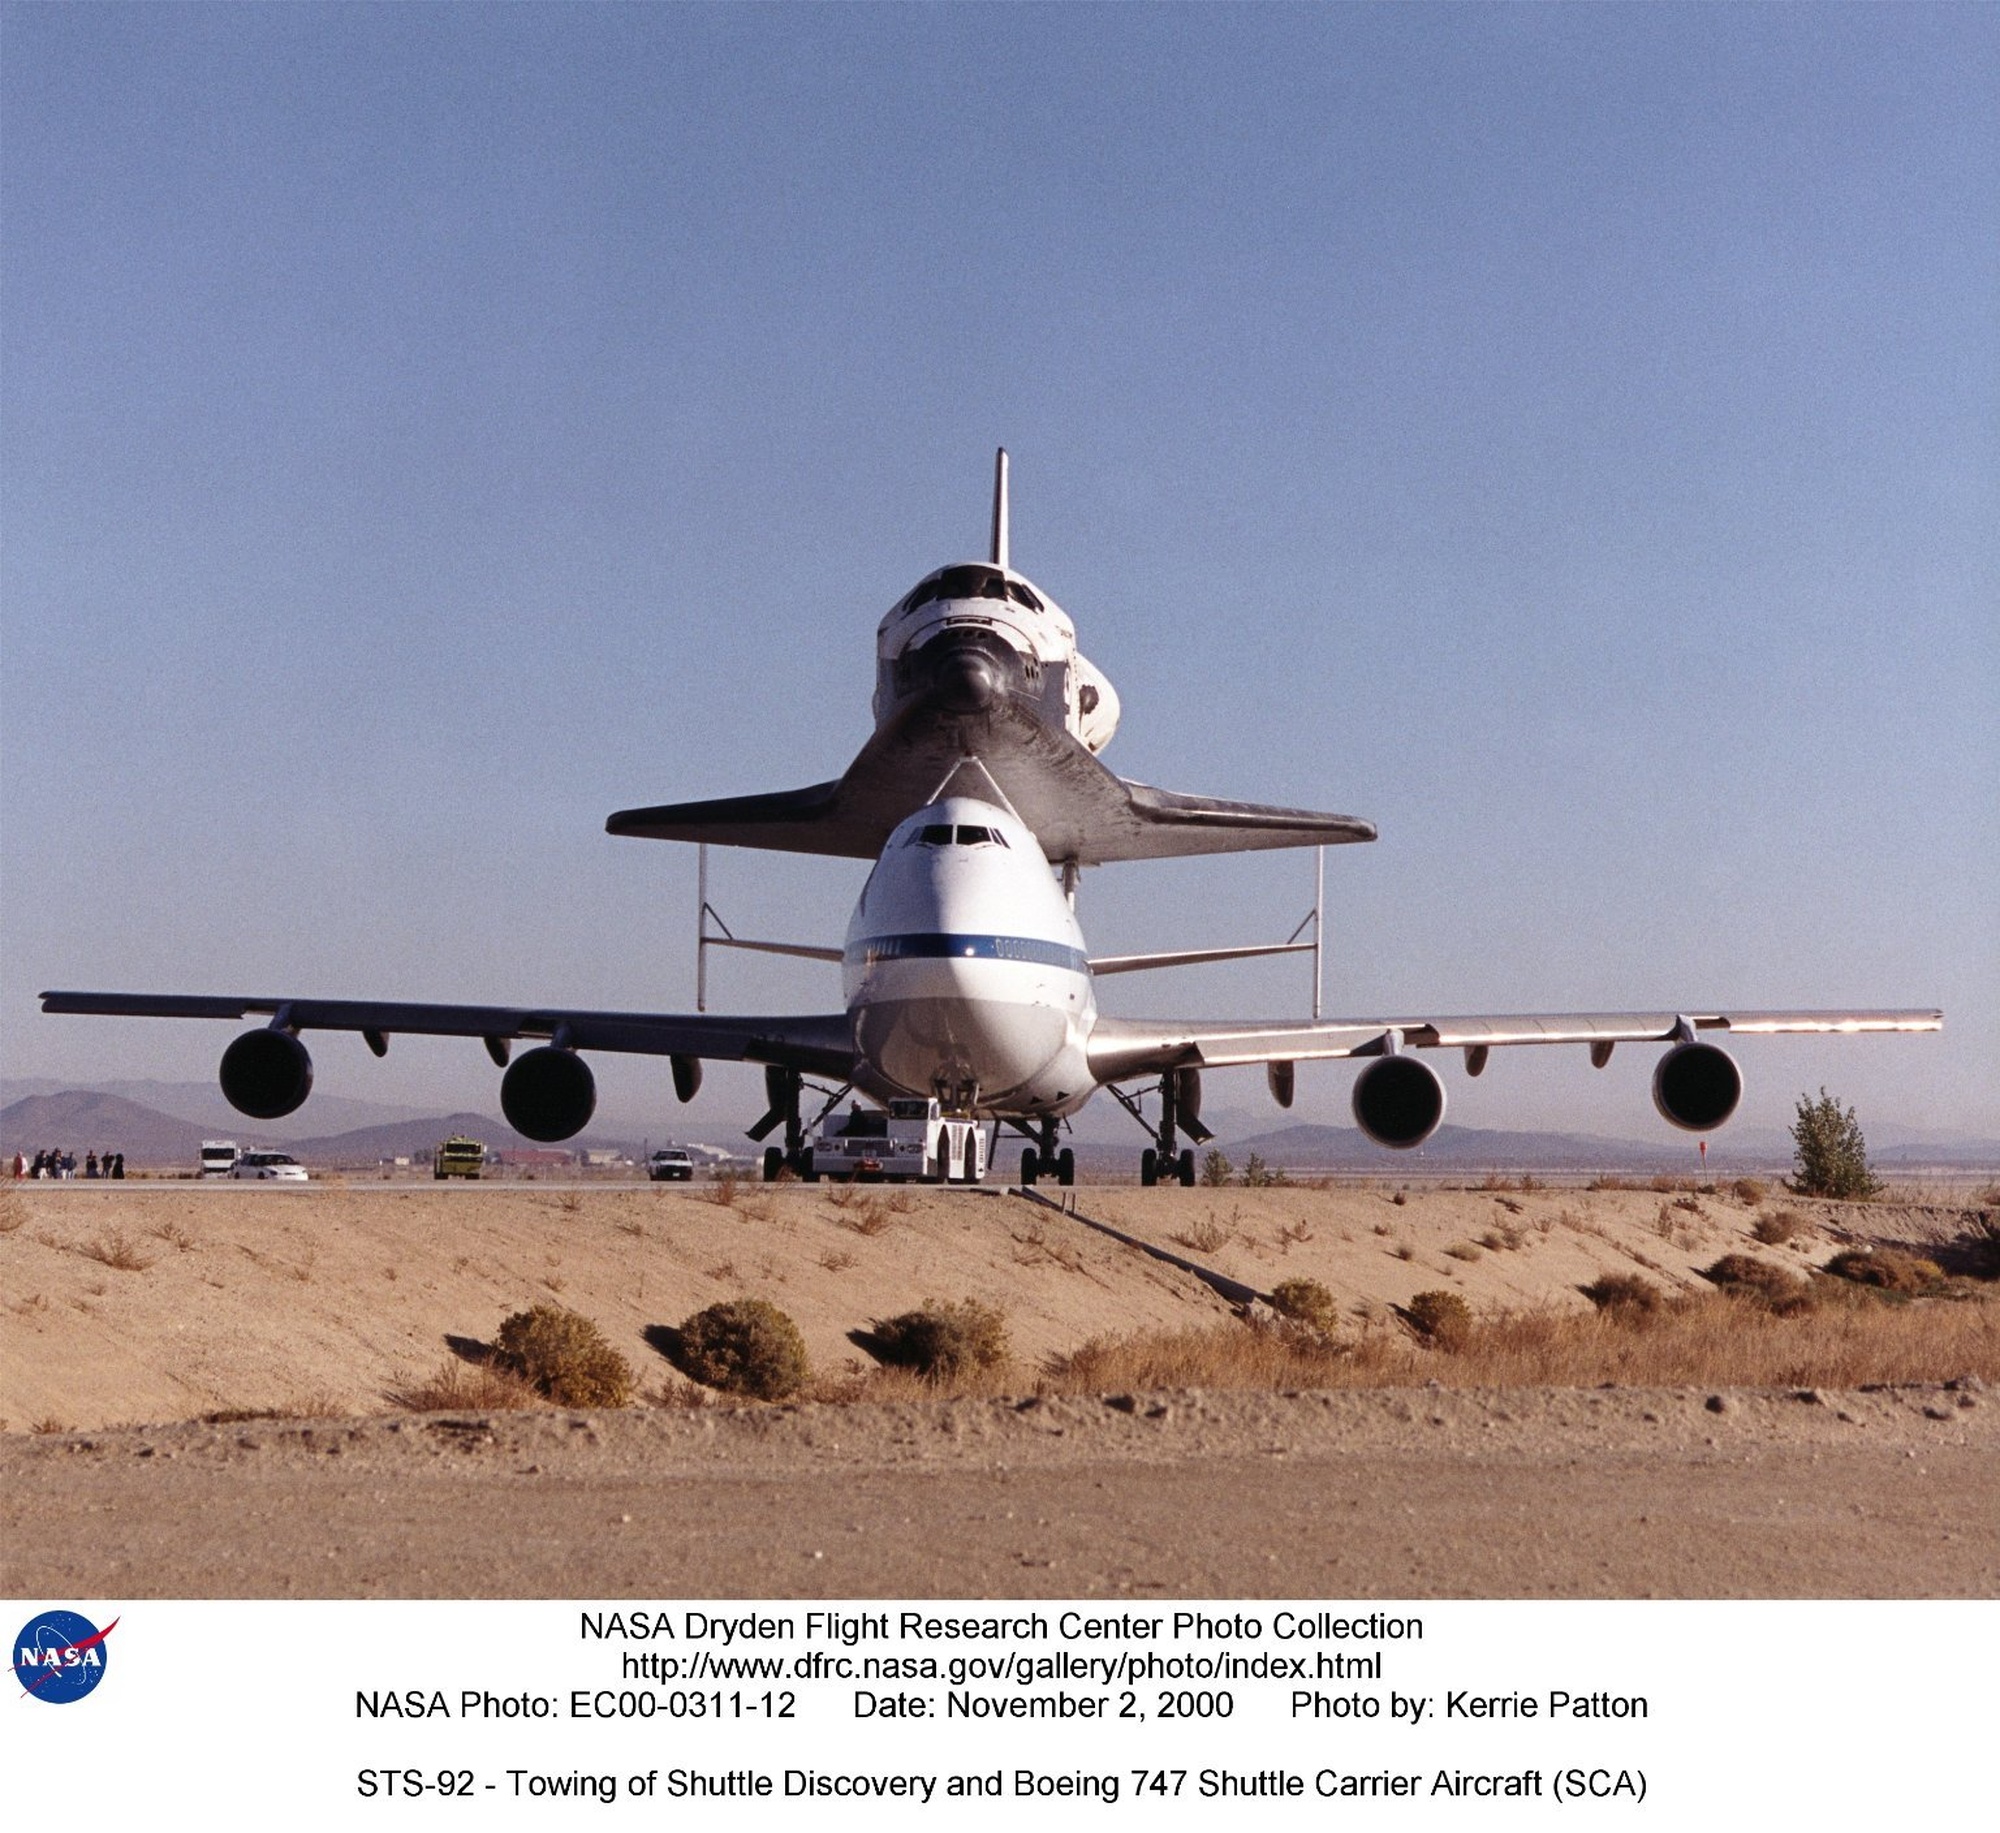 DVIDS - Images - STS-92 - Towing of Shuttle Discovery and Boeing 747  Shuttle Carrier Aircraft (SCA)